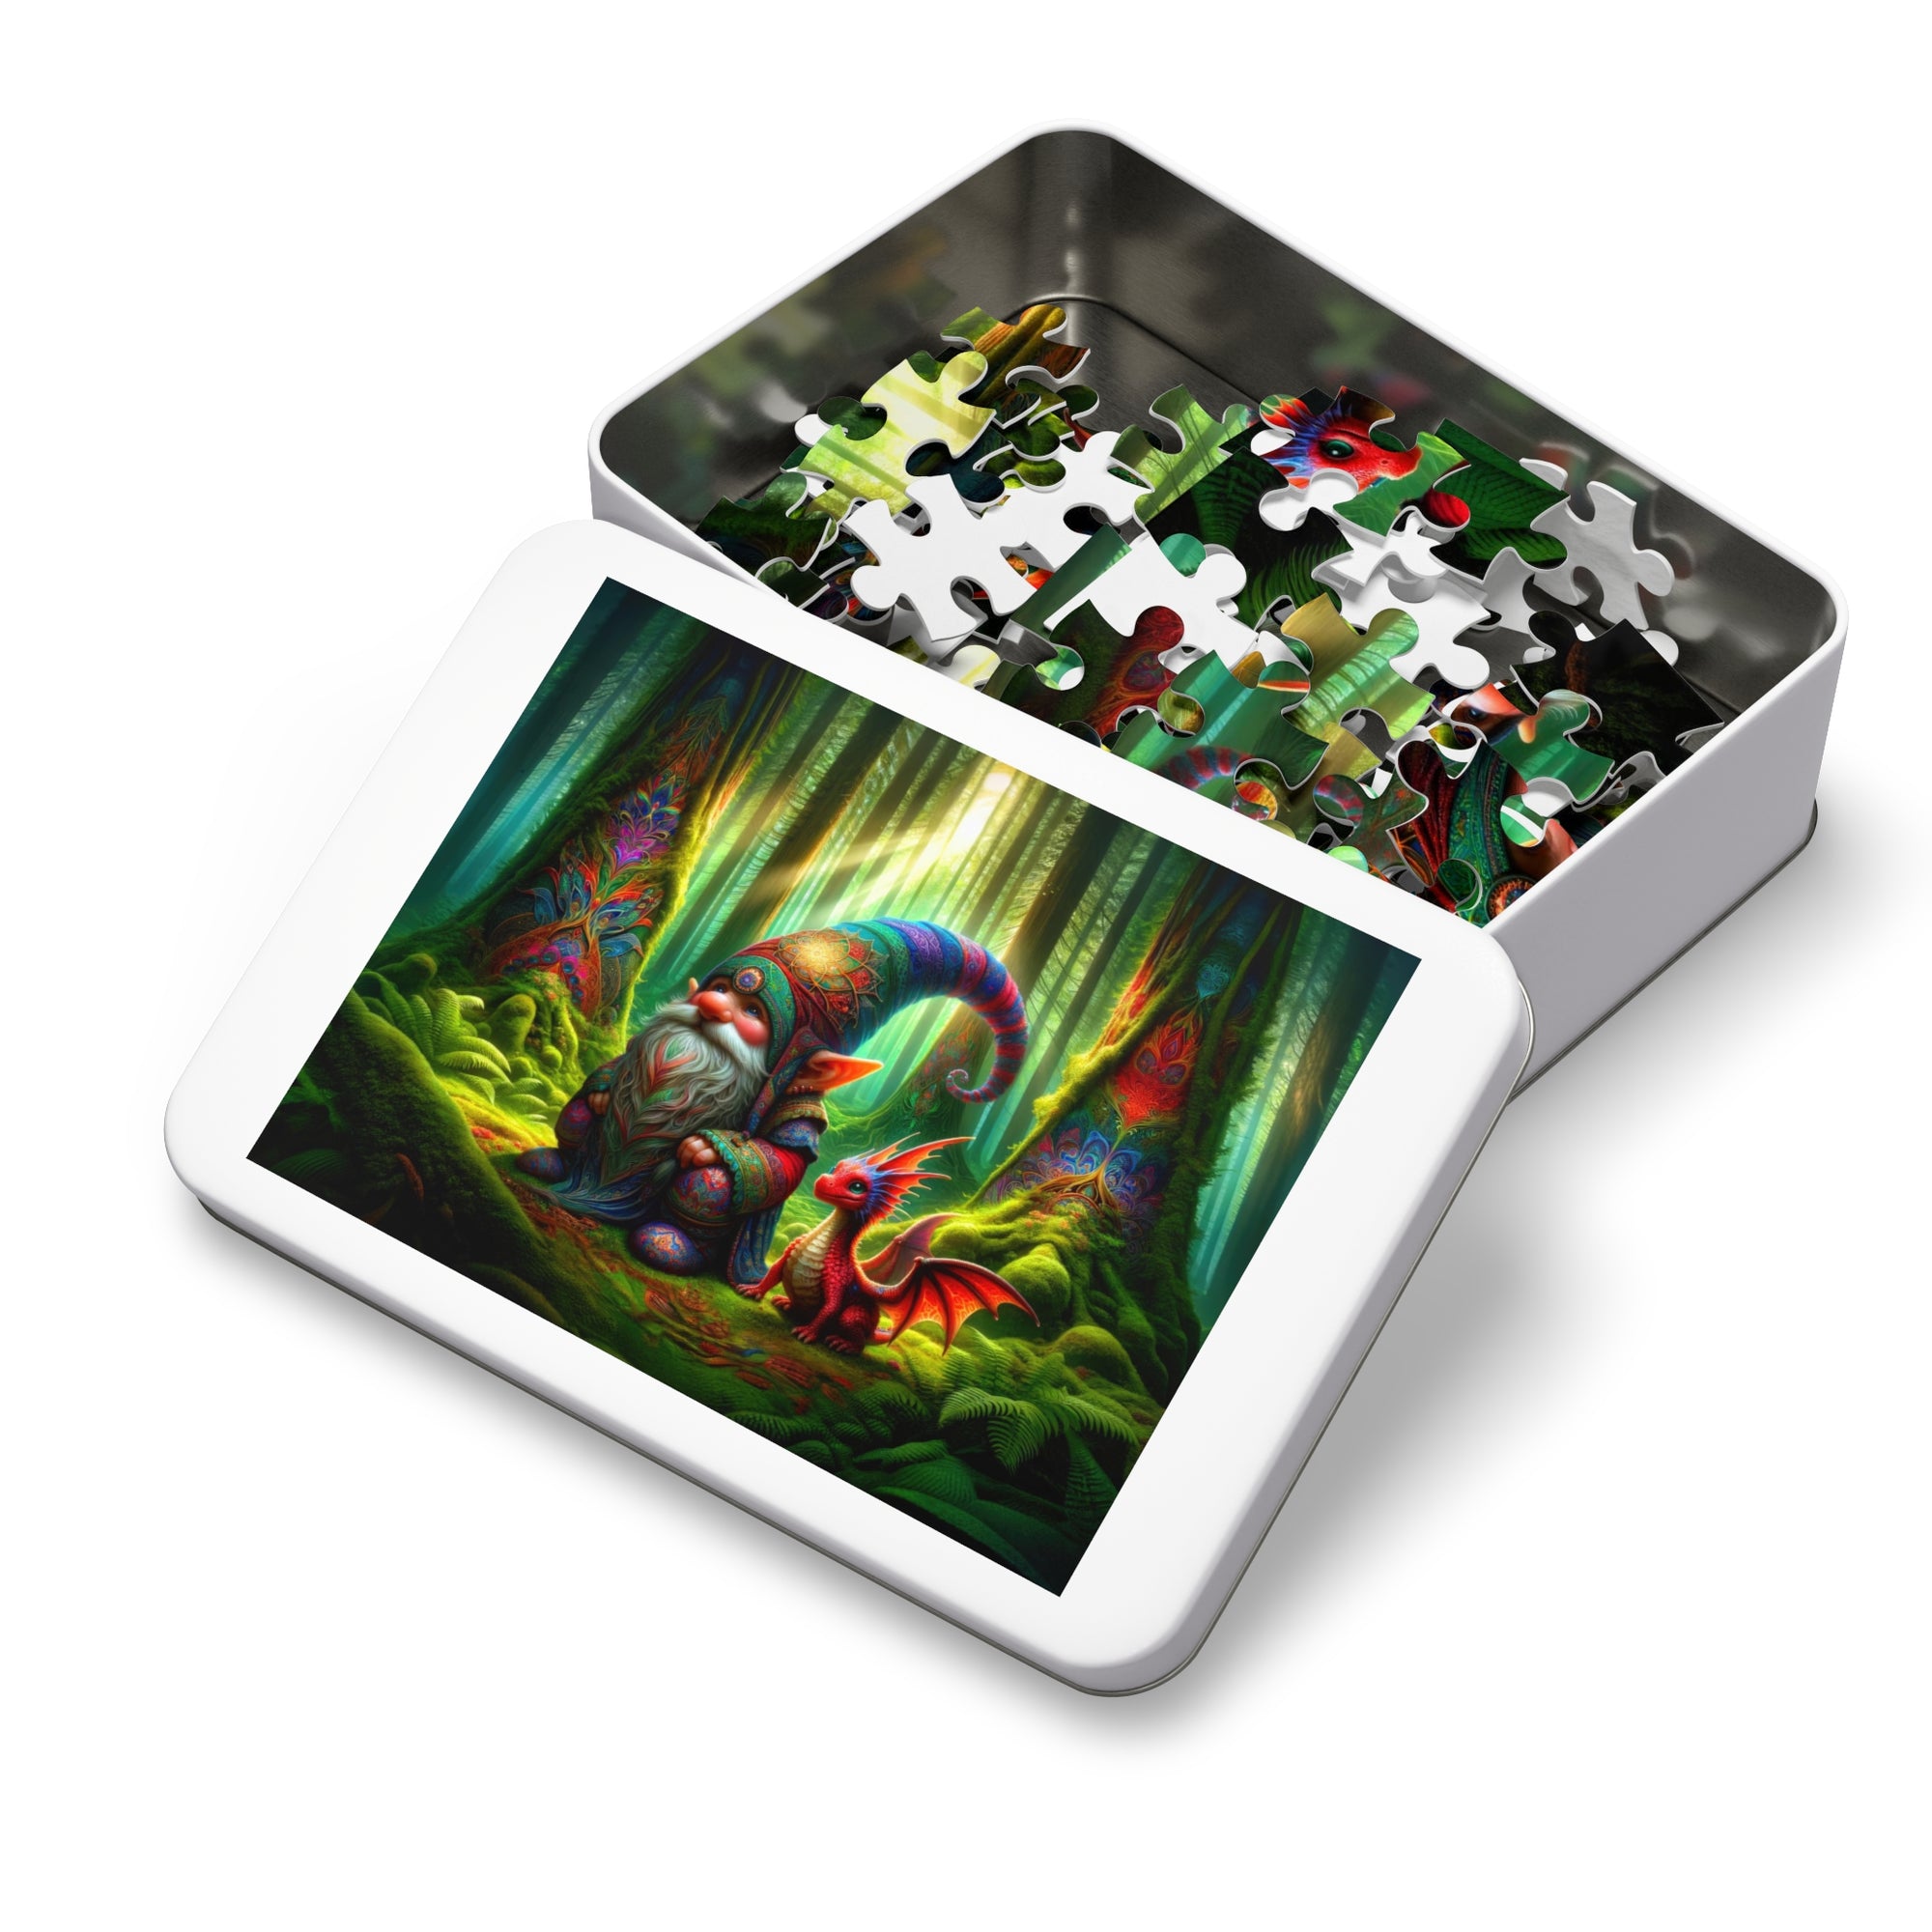 The Guardian of the Enchanted Glade Jigsaw Puzzle